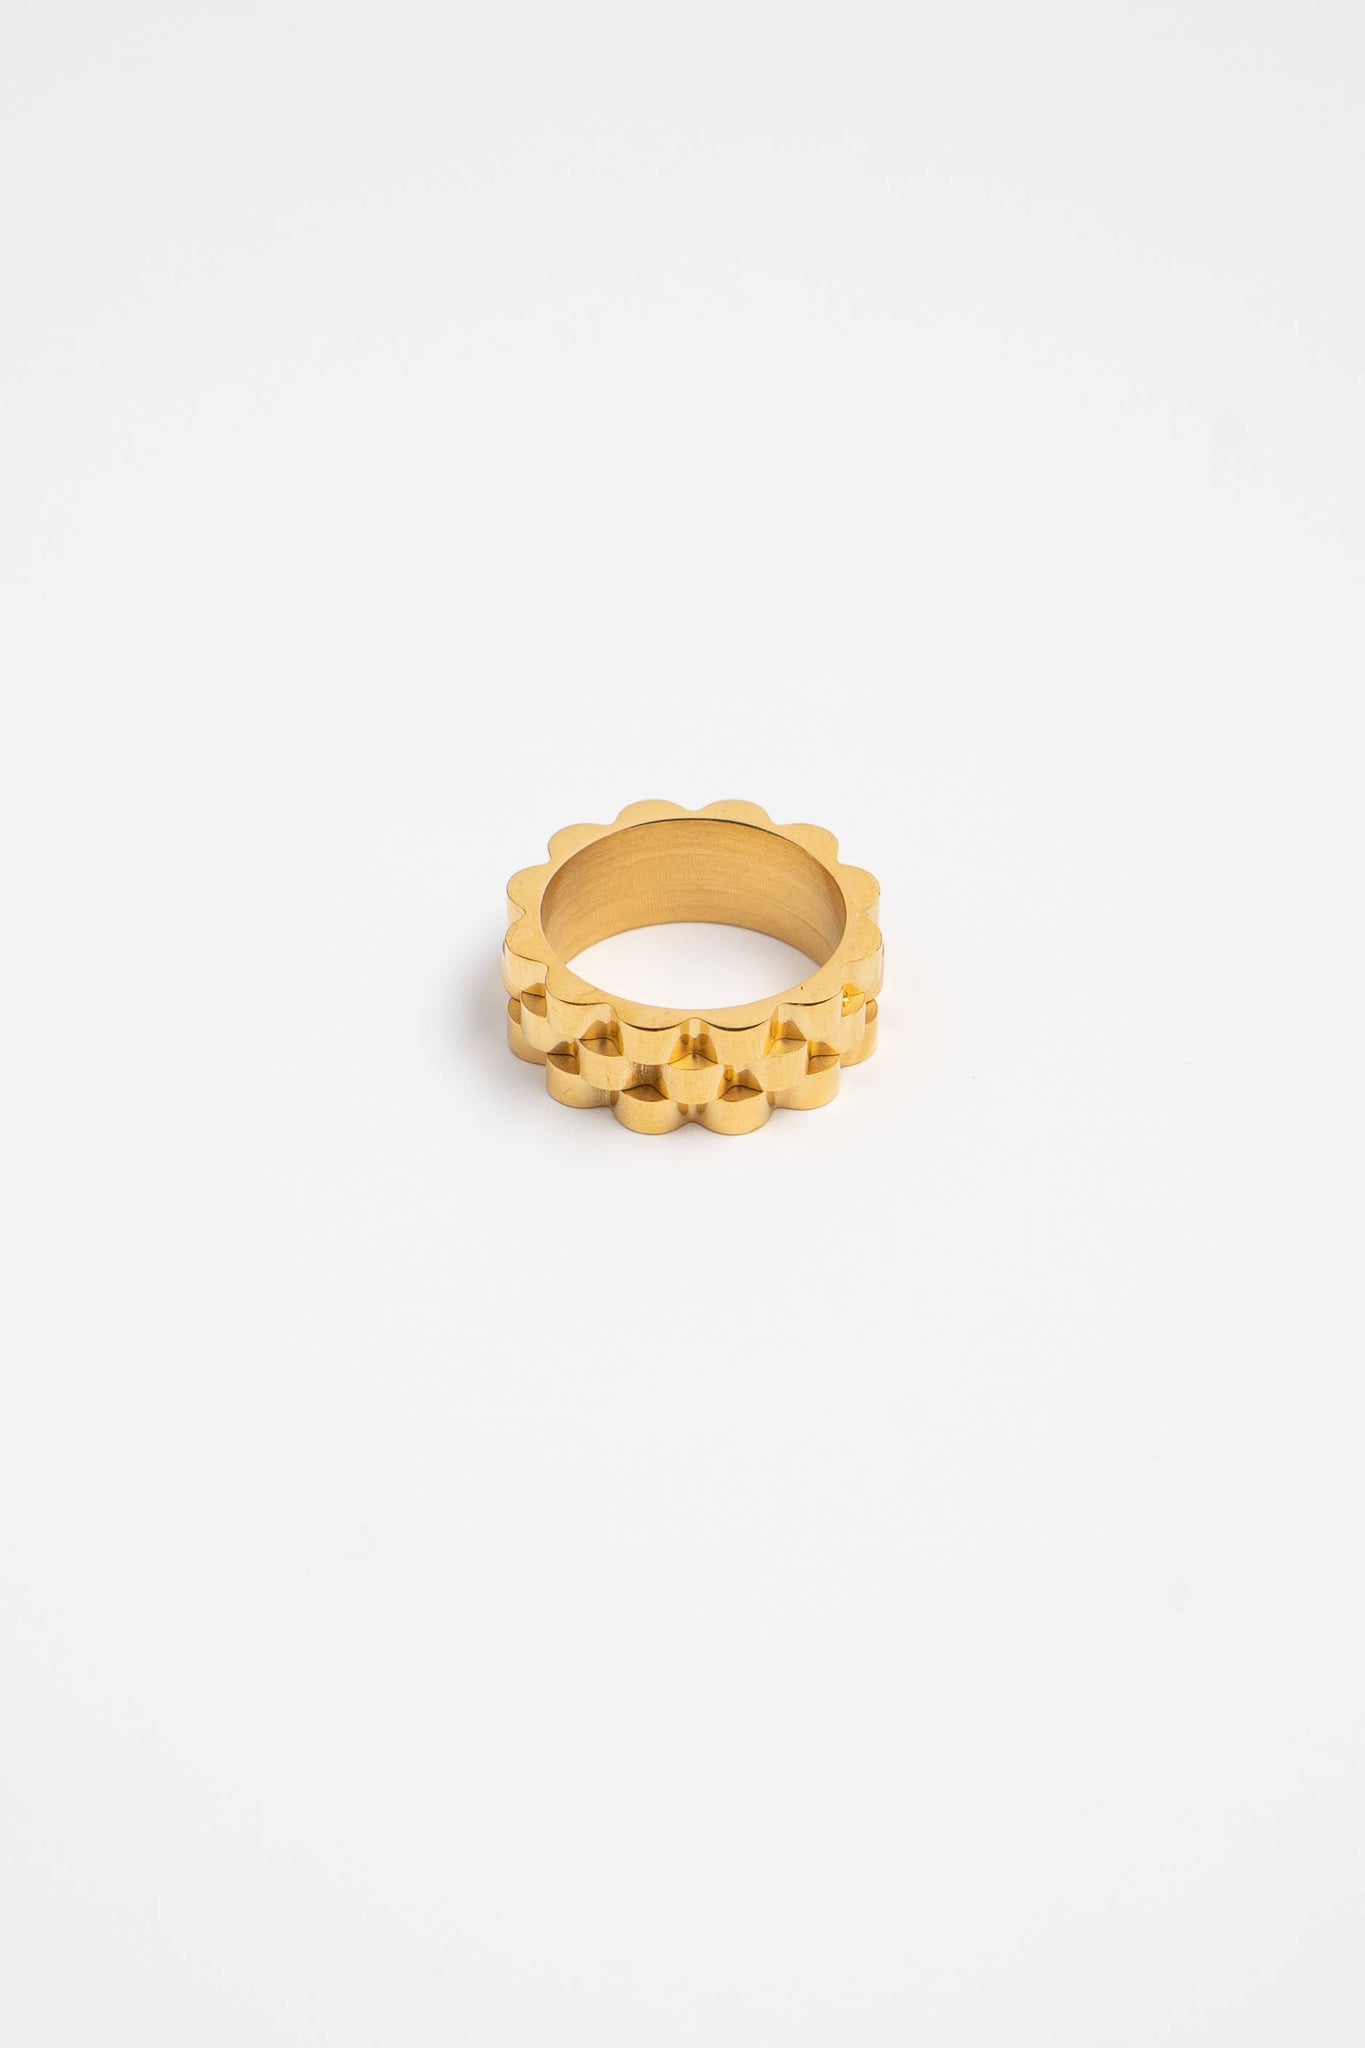 PRODUCT DETAILS Water Resistant 💧METAL: 18K gold over stainless steel. Hypoallergenic. Runs Small DESIGNER NOTE: This classic ring is sure to go with any outfit. Whether you wear it on date night or to the office, you are sure to make a statement. STYLE TIP: Wear this ring with its matching sister bracelet for a complete look.